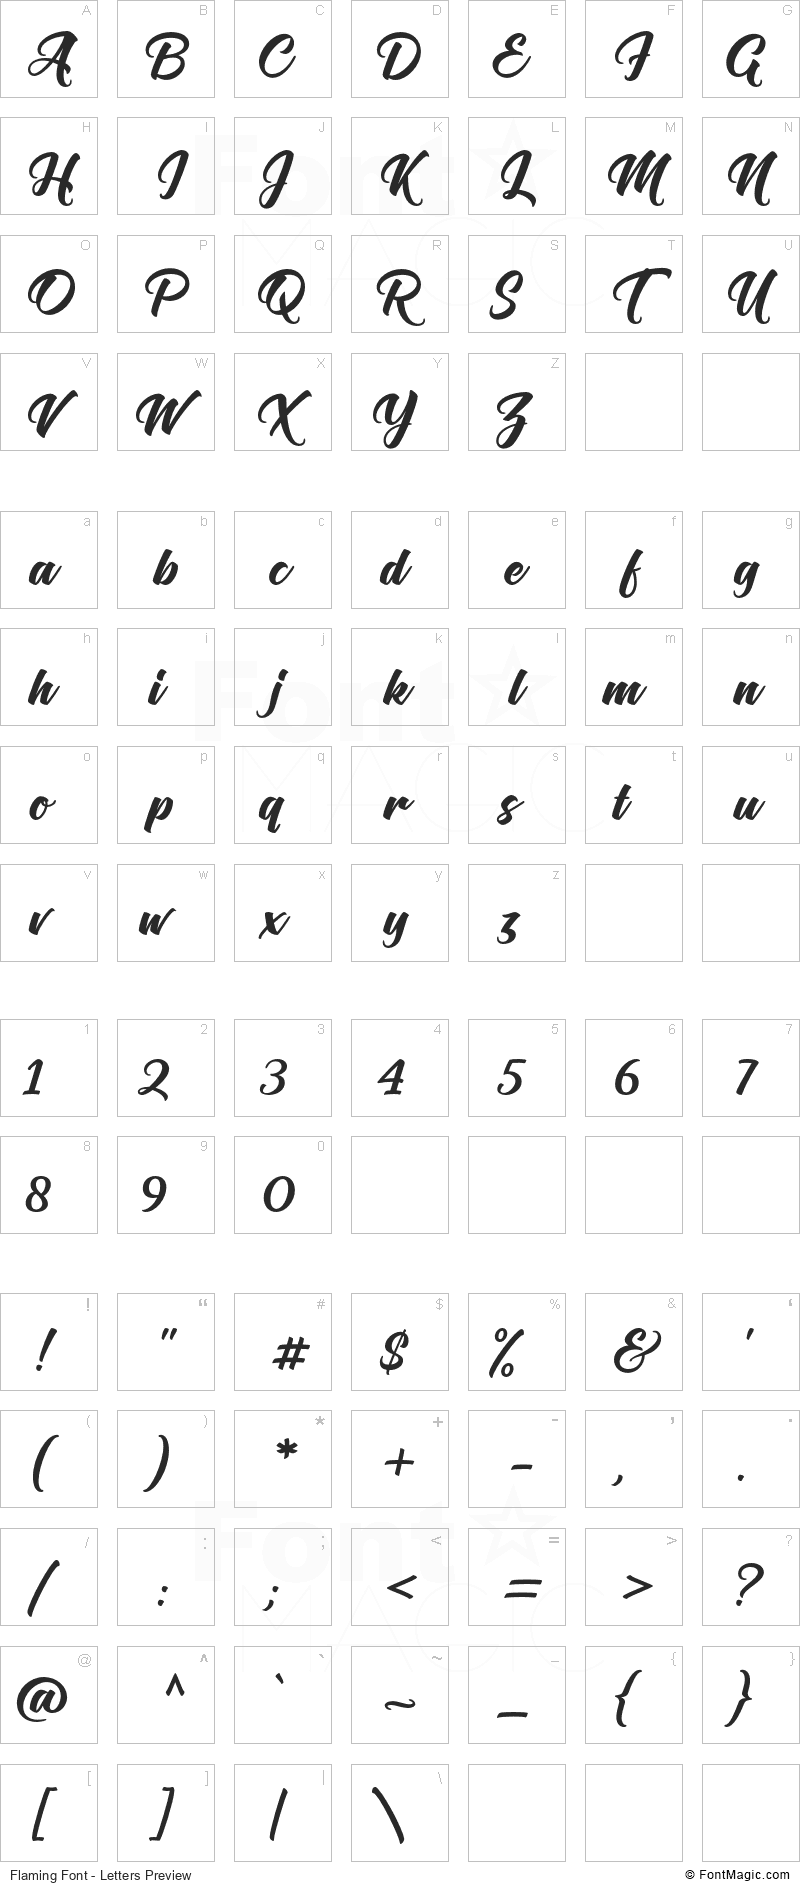 Flaming Font - All Latters Preview Chart